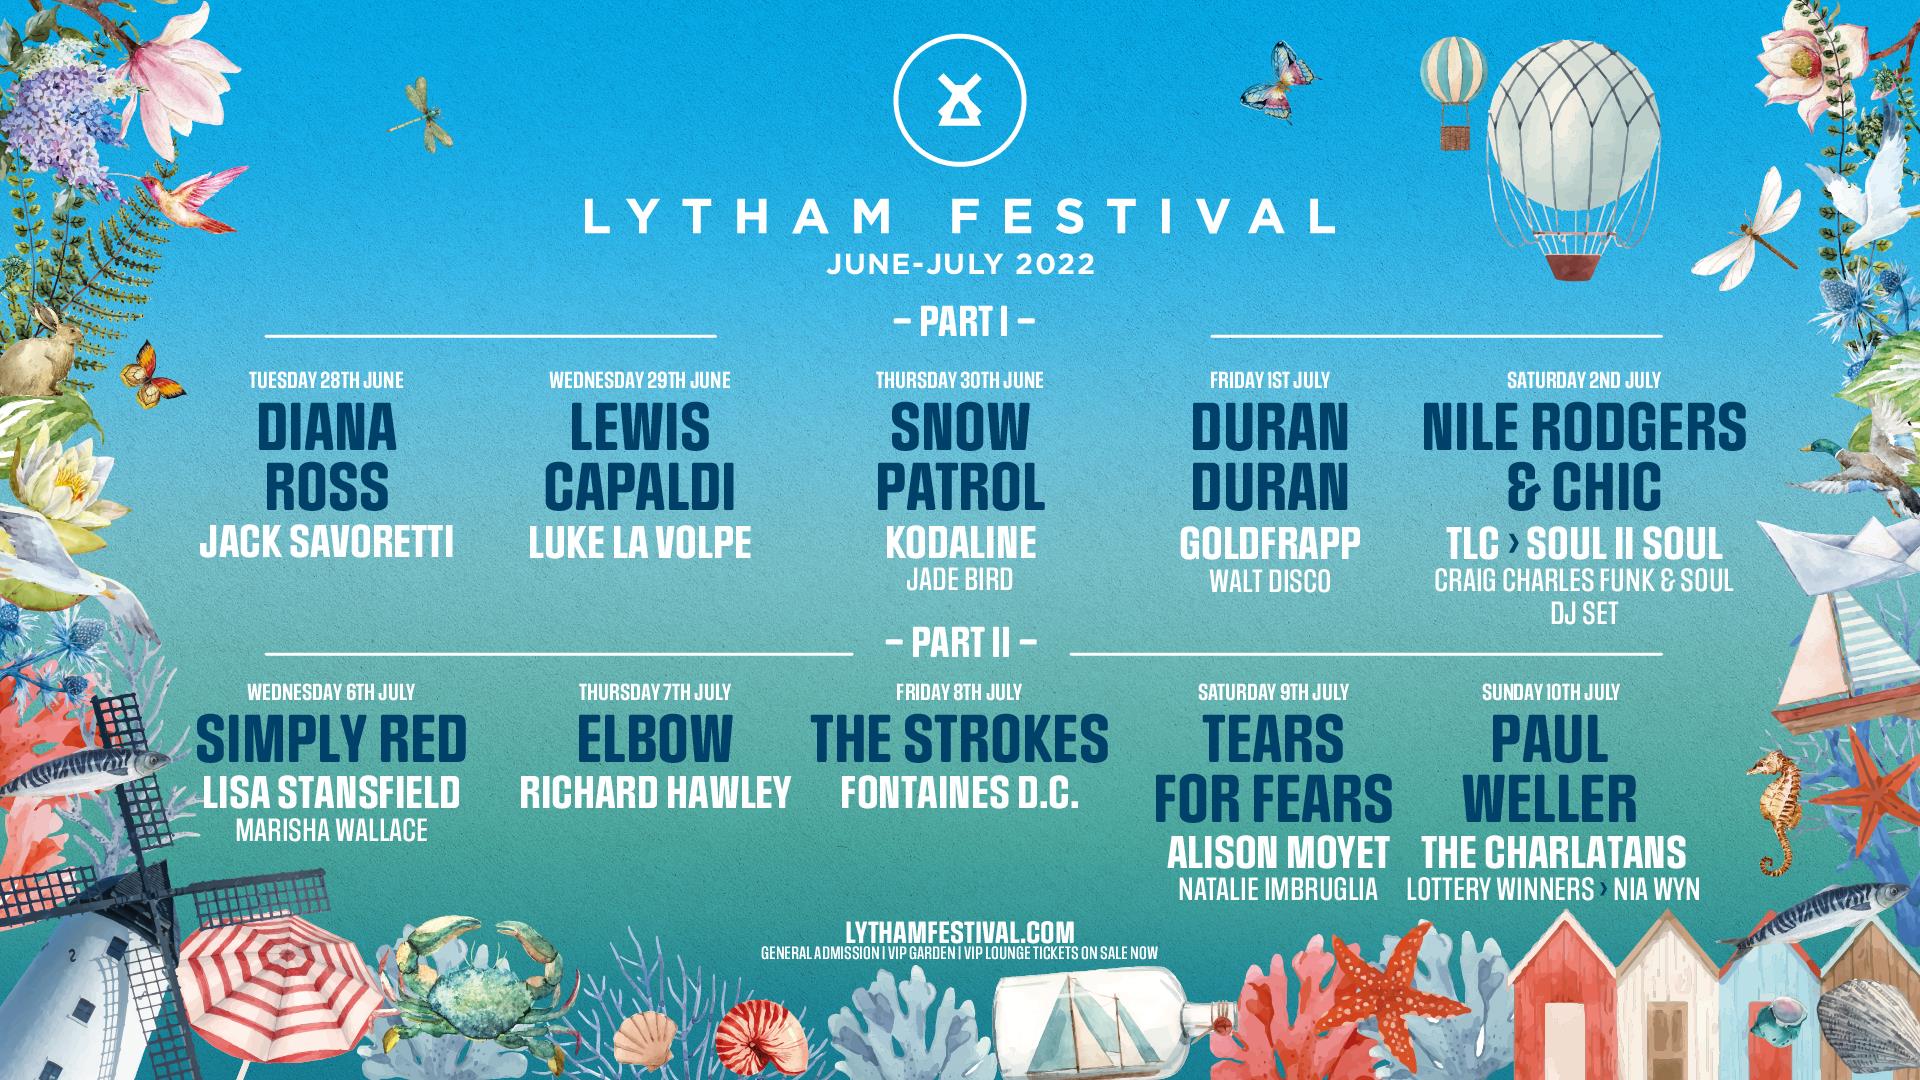 Lytham Festival 2022 – Nile Rodgers + CHIC - Lowther Pavilion